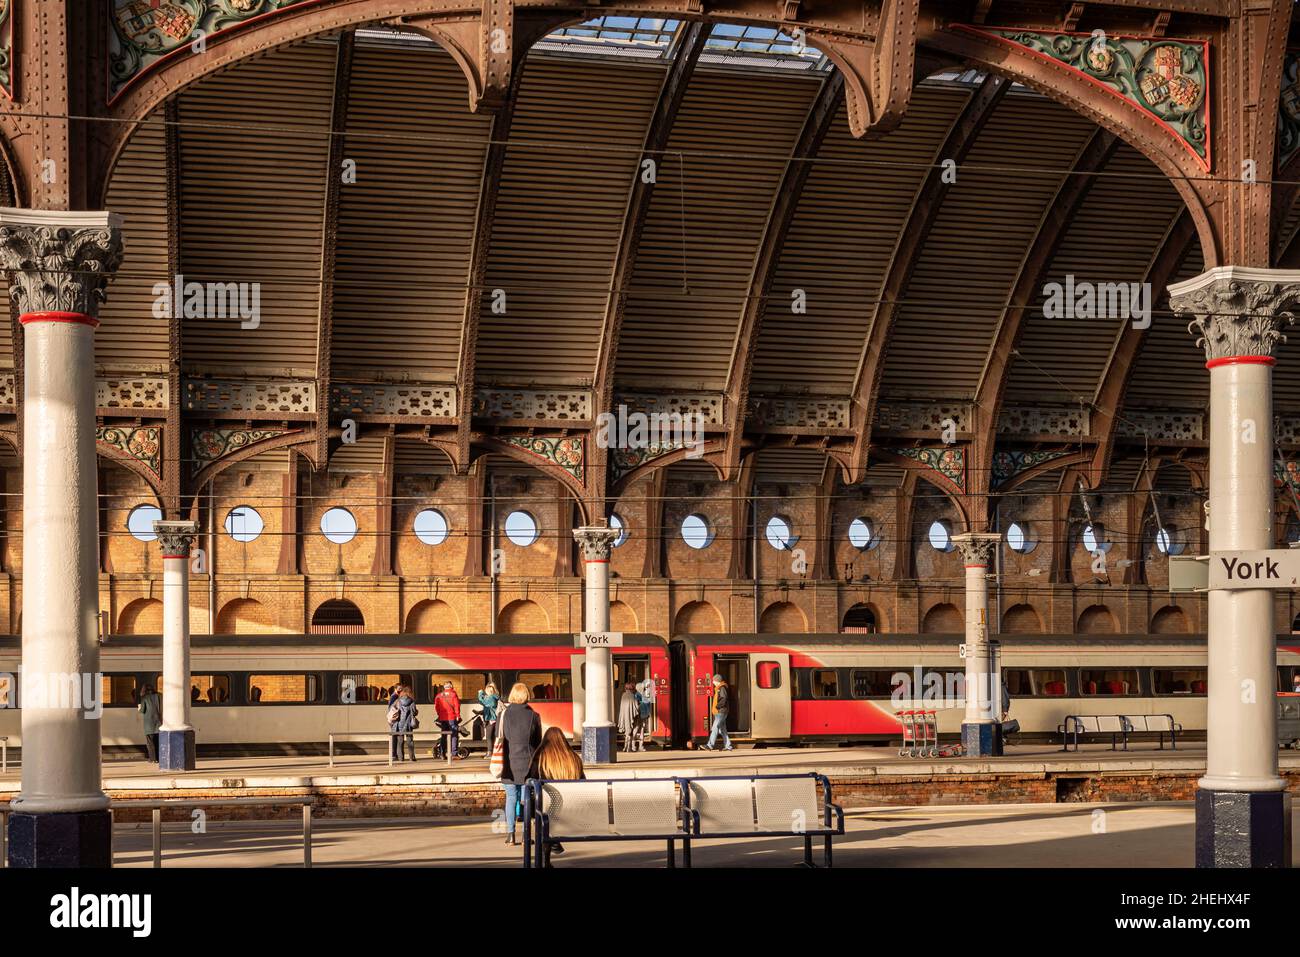 Railway station platforms with passengers waiting for a train.  Overhead is an historic canopy with columns on each side. Stock Photo